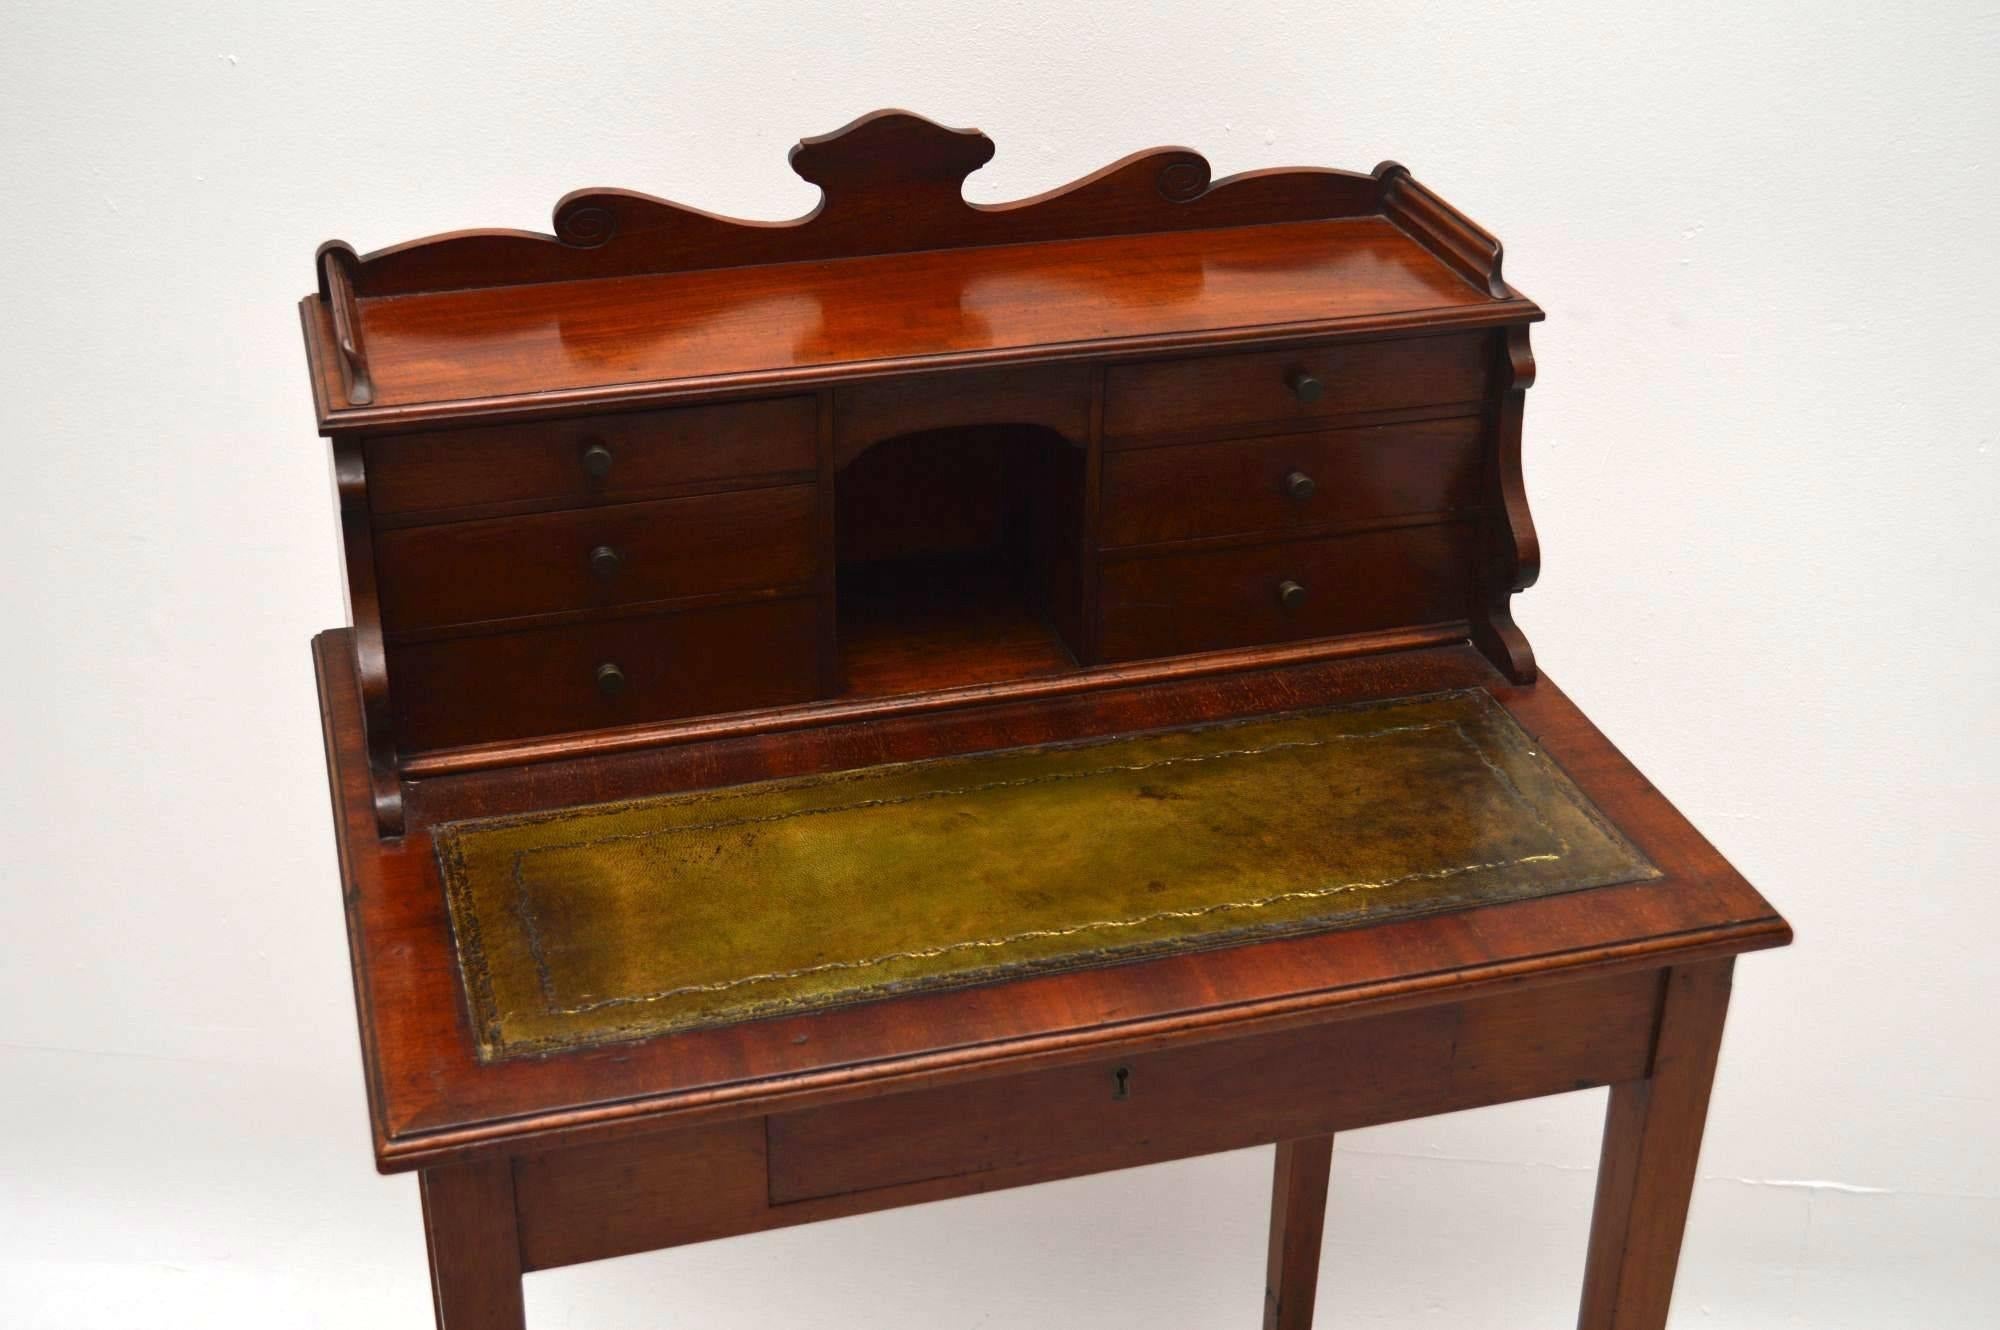 Small antique Victorian mahogany escritoire desk dating from the 1890s period. It has two banks of drawers either side of a pigeon hole above a tooled leather writing surface. There's a single drawer beneath that and there are four tapered legs.